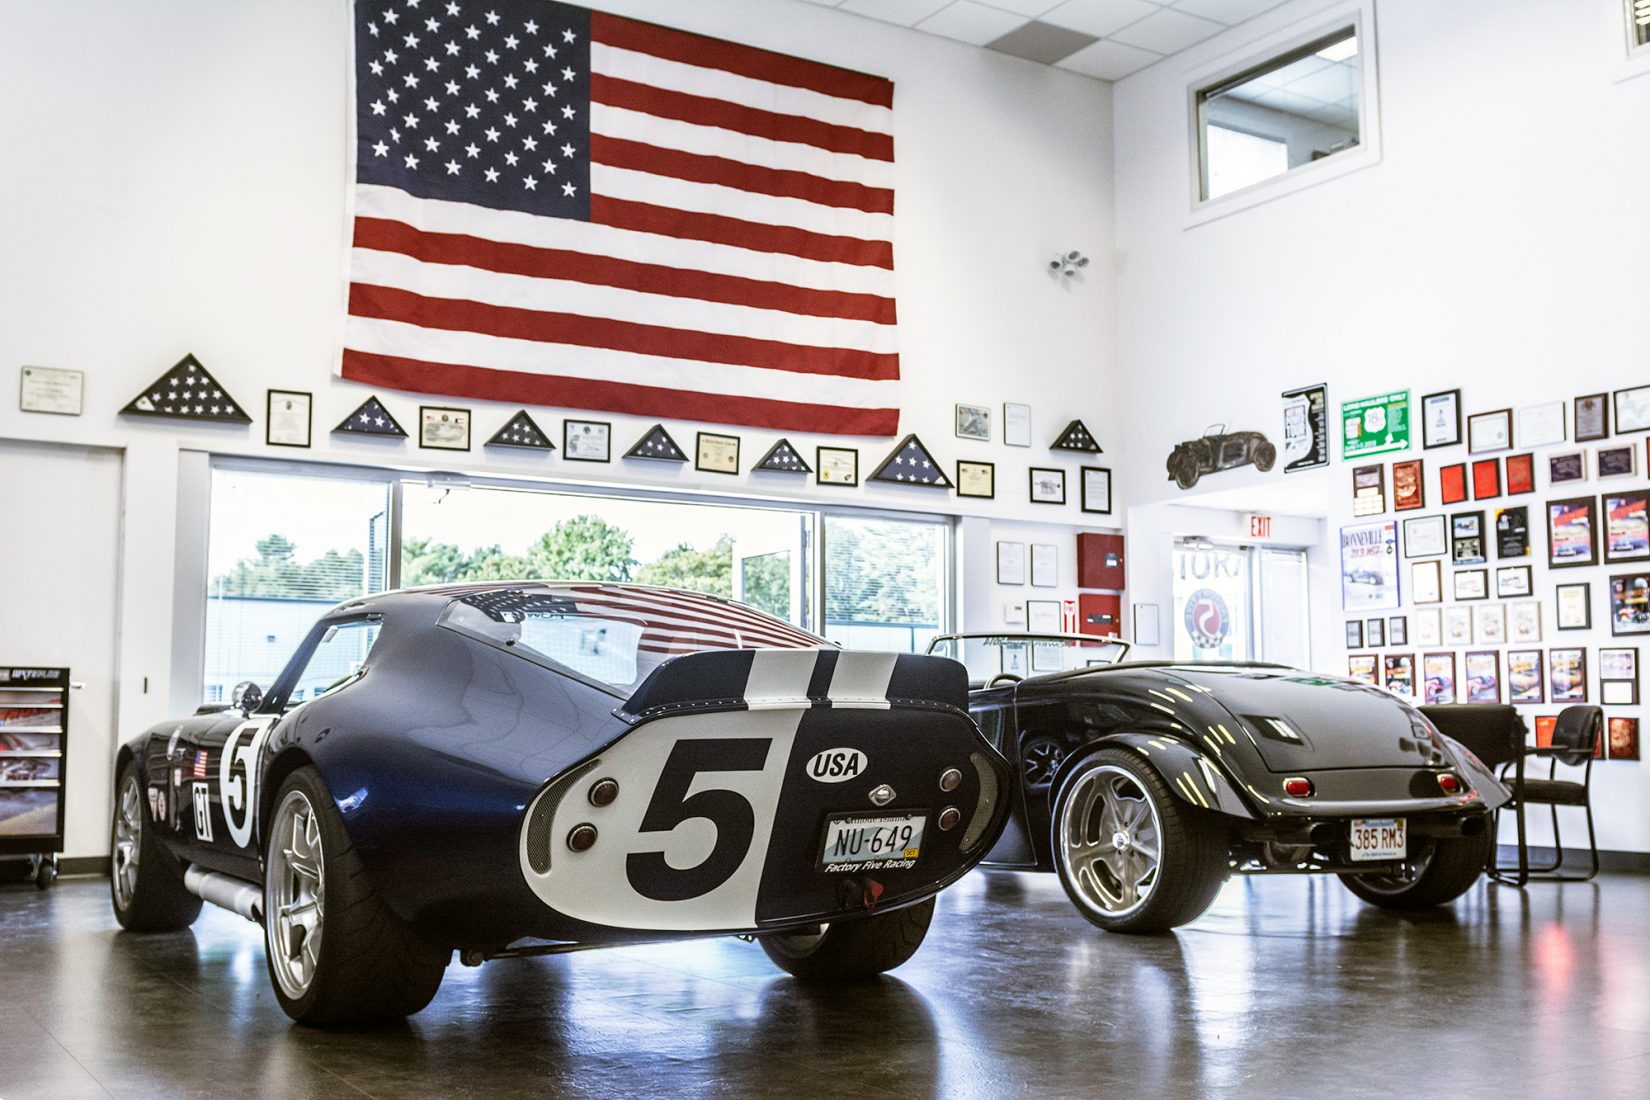 Christian Rowell from High Octane Image captured this cool shot of two iconic American cars paying homage.